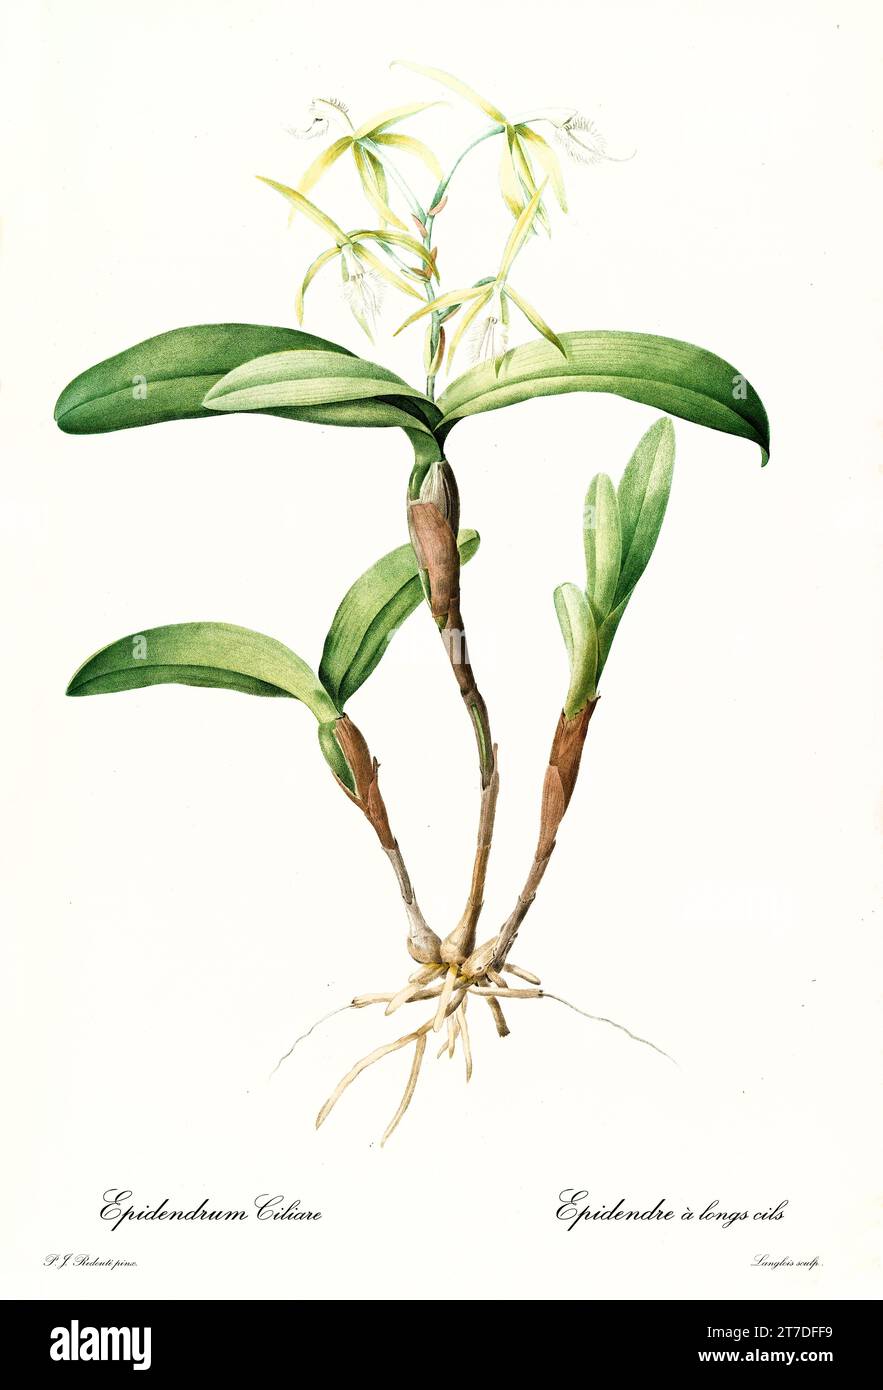 Old illustration of Fringed Star Orchid (Epidendrum ciliare). Les Liliacées, By P. J. Redouté. Impr. Didot Jeune, Paris, 1805 - 1816 Stock Photo